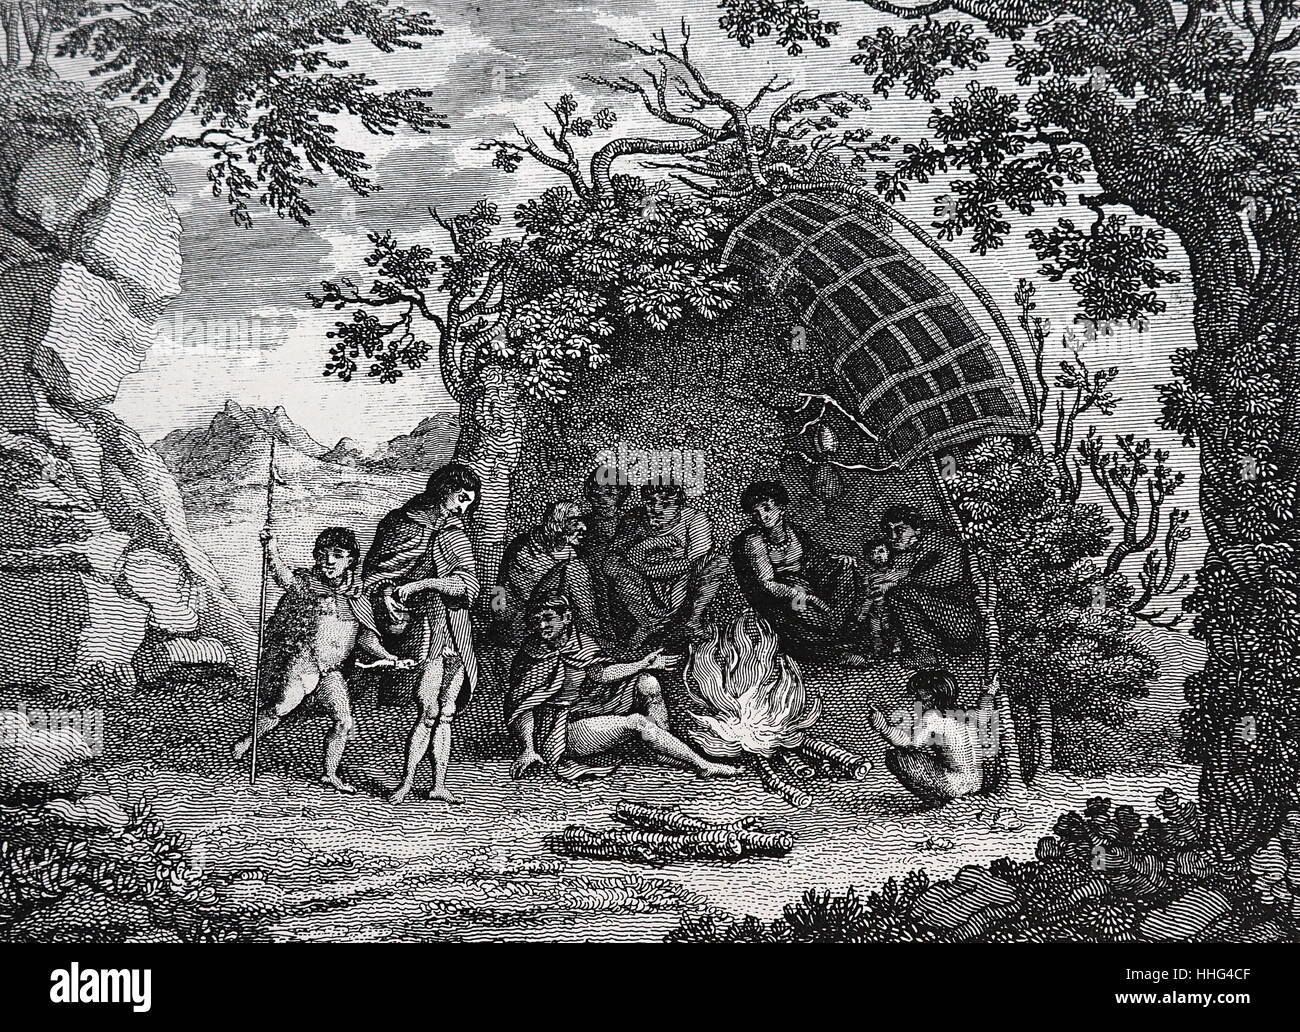 Natives of Tierra del Fuego, showing their clothing and shelter. From Captain Cook's 'Original Voyages Round the World'. Magellan encountered these natives on his first voyage of circumnavigation. (1519-22). Tierra del Fuego 'Land of Fire'; is an archipelago off the southernmost tip of the South American mainland, across the Strait of Magellan Stock Photo